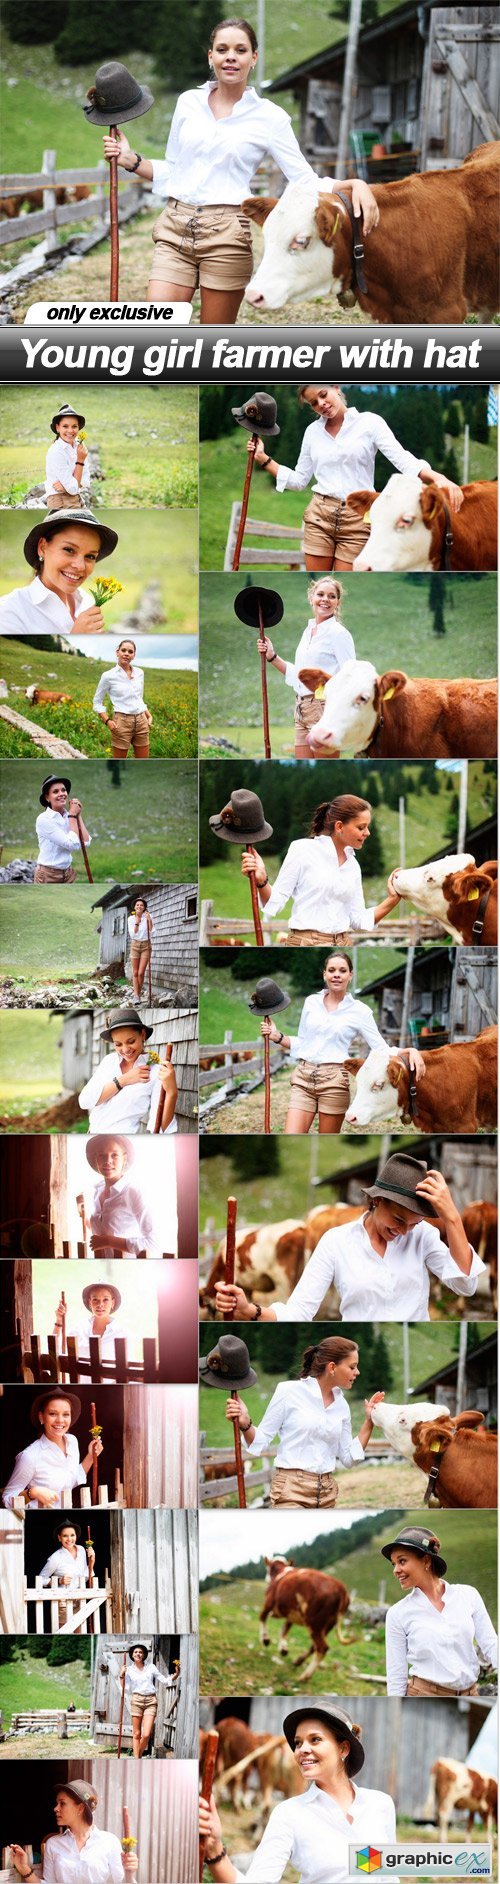 Young girl farmer with hat - 20 UHQ JPEG